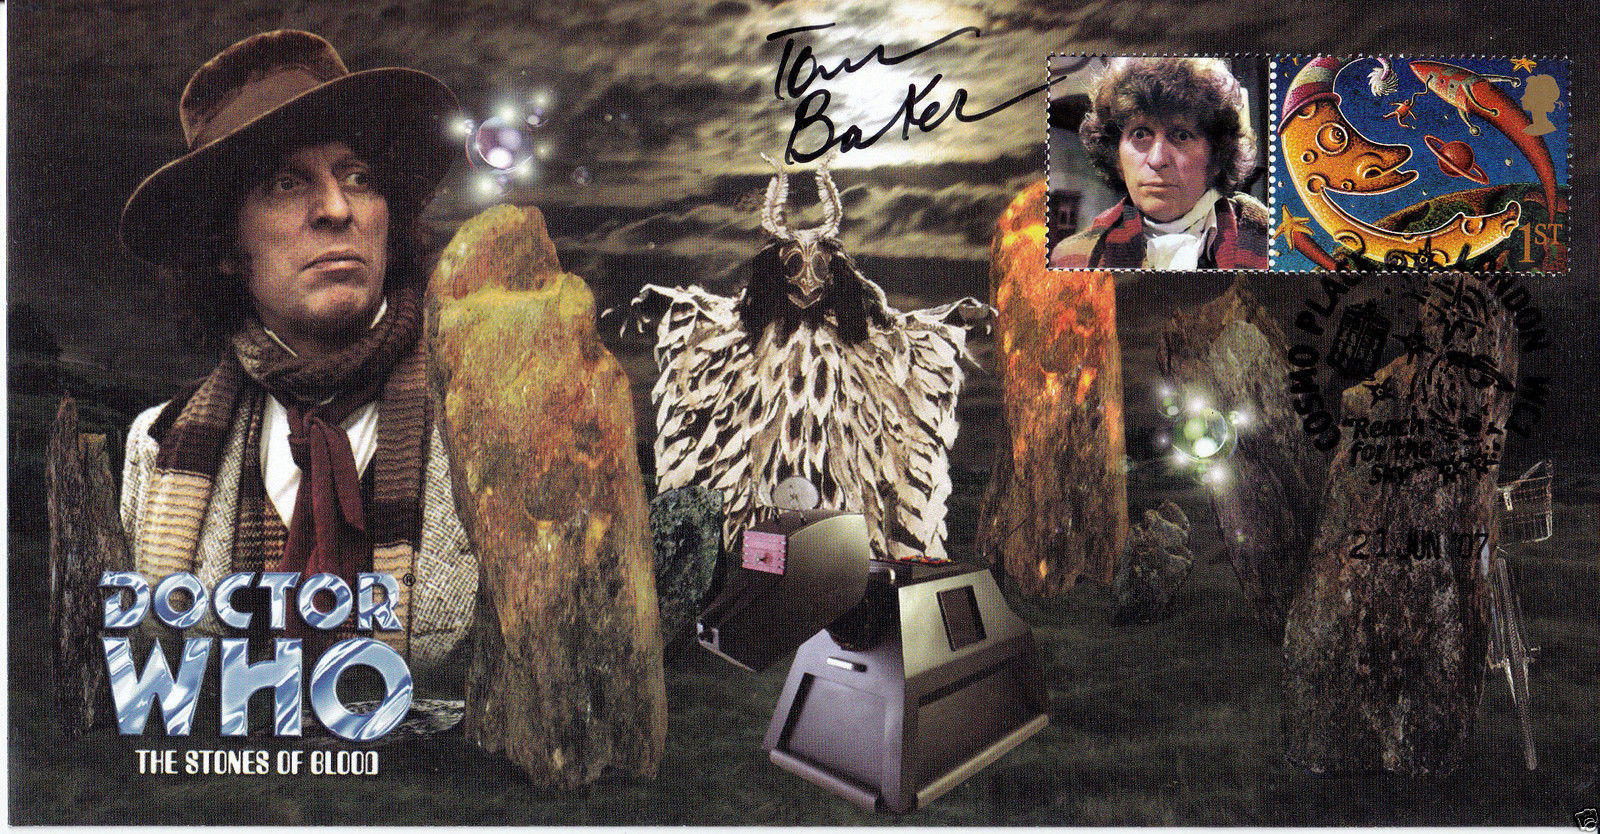 Doctor Who The Stones of Blood CollectIble Stamp Cover Signed by TOM BAKER